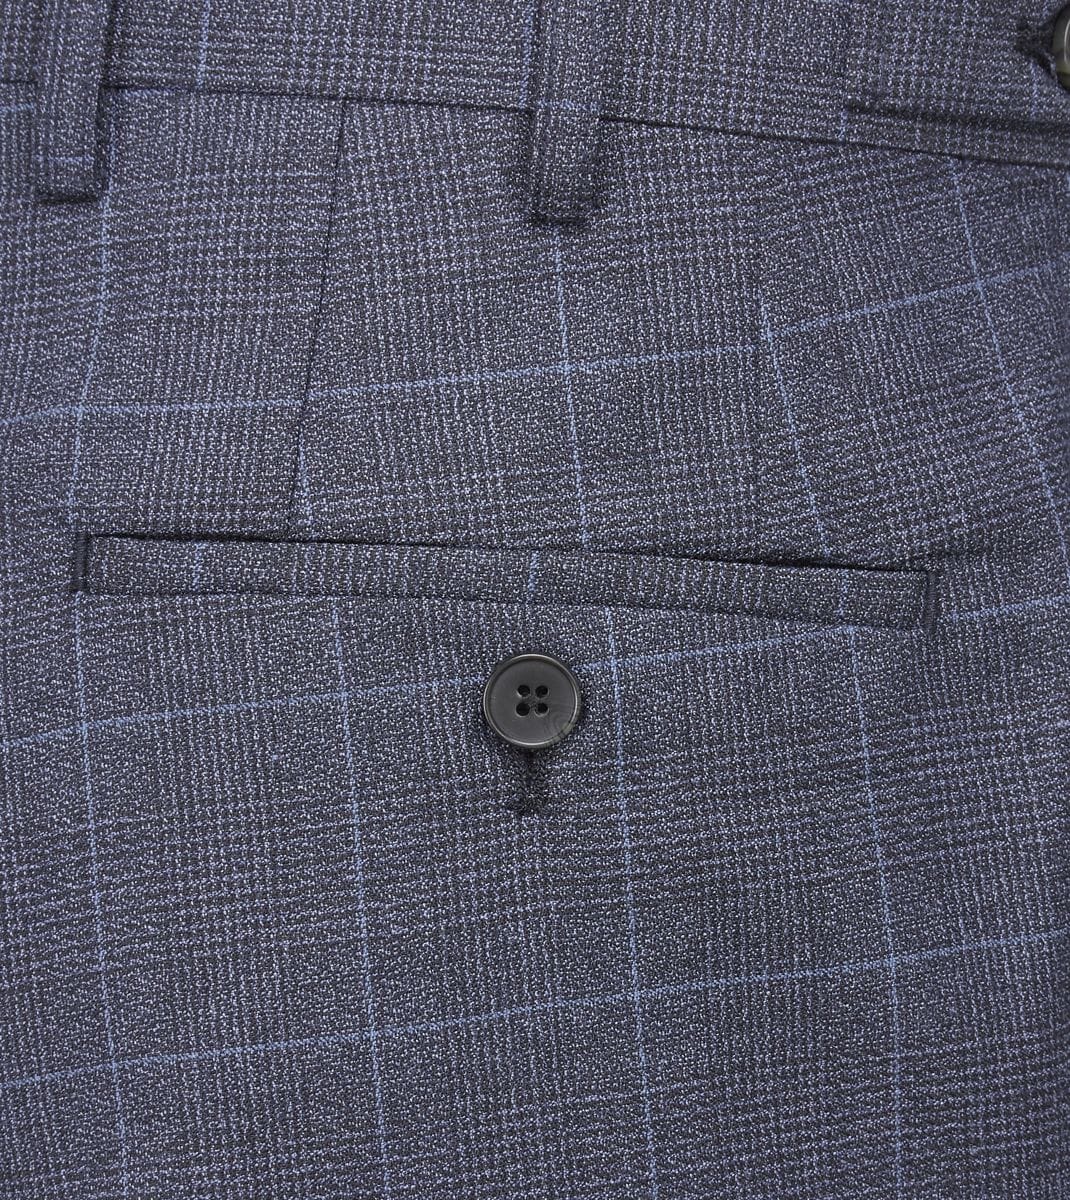 Anello Blue Prince Of Wales Check Trousers - Trousers - - THREADPEPPER